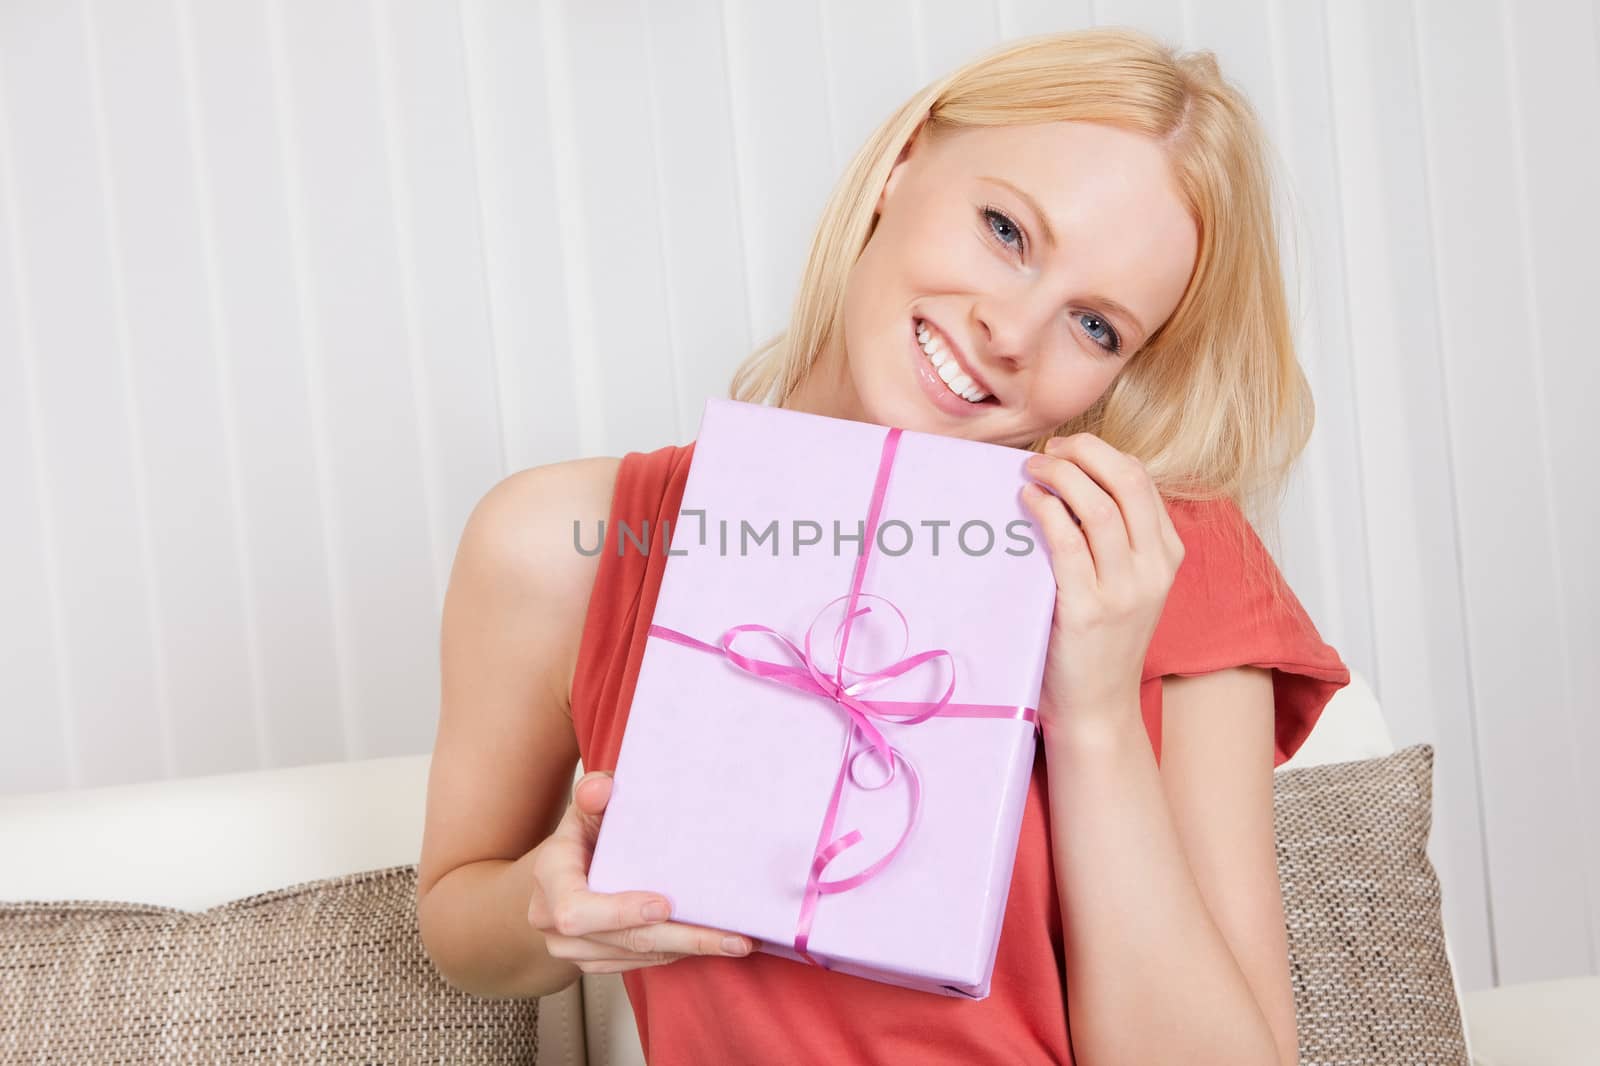 Beautiful young woman with her present on the sofa